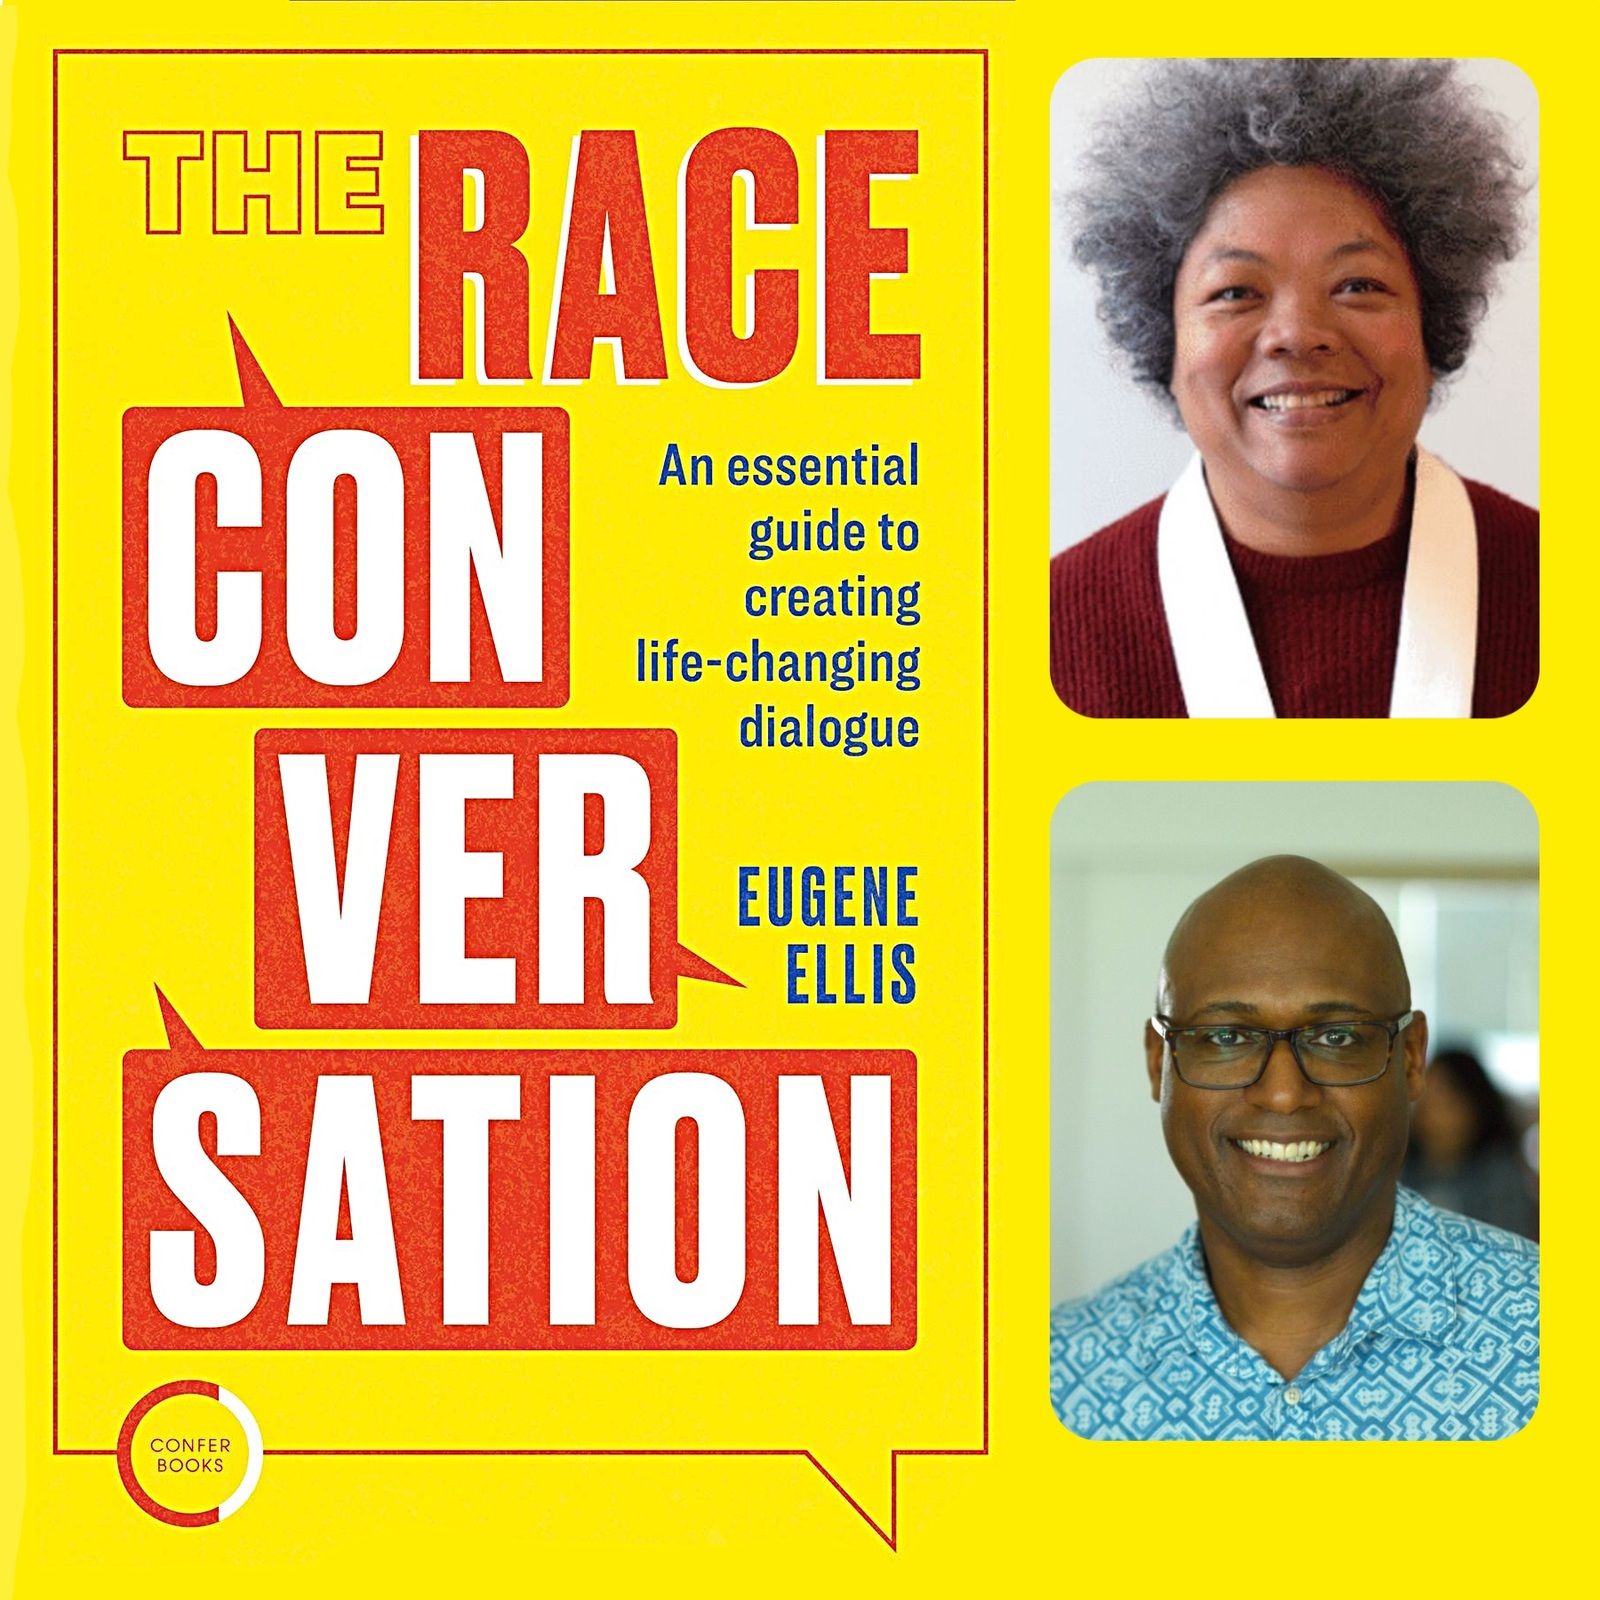 441: The Race Conversation with Bodhilila and Eugene Ellis